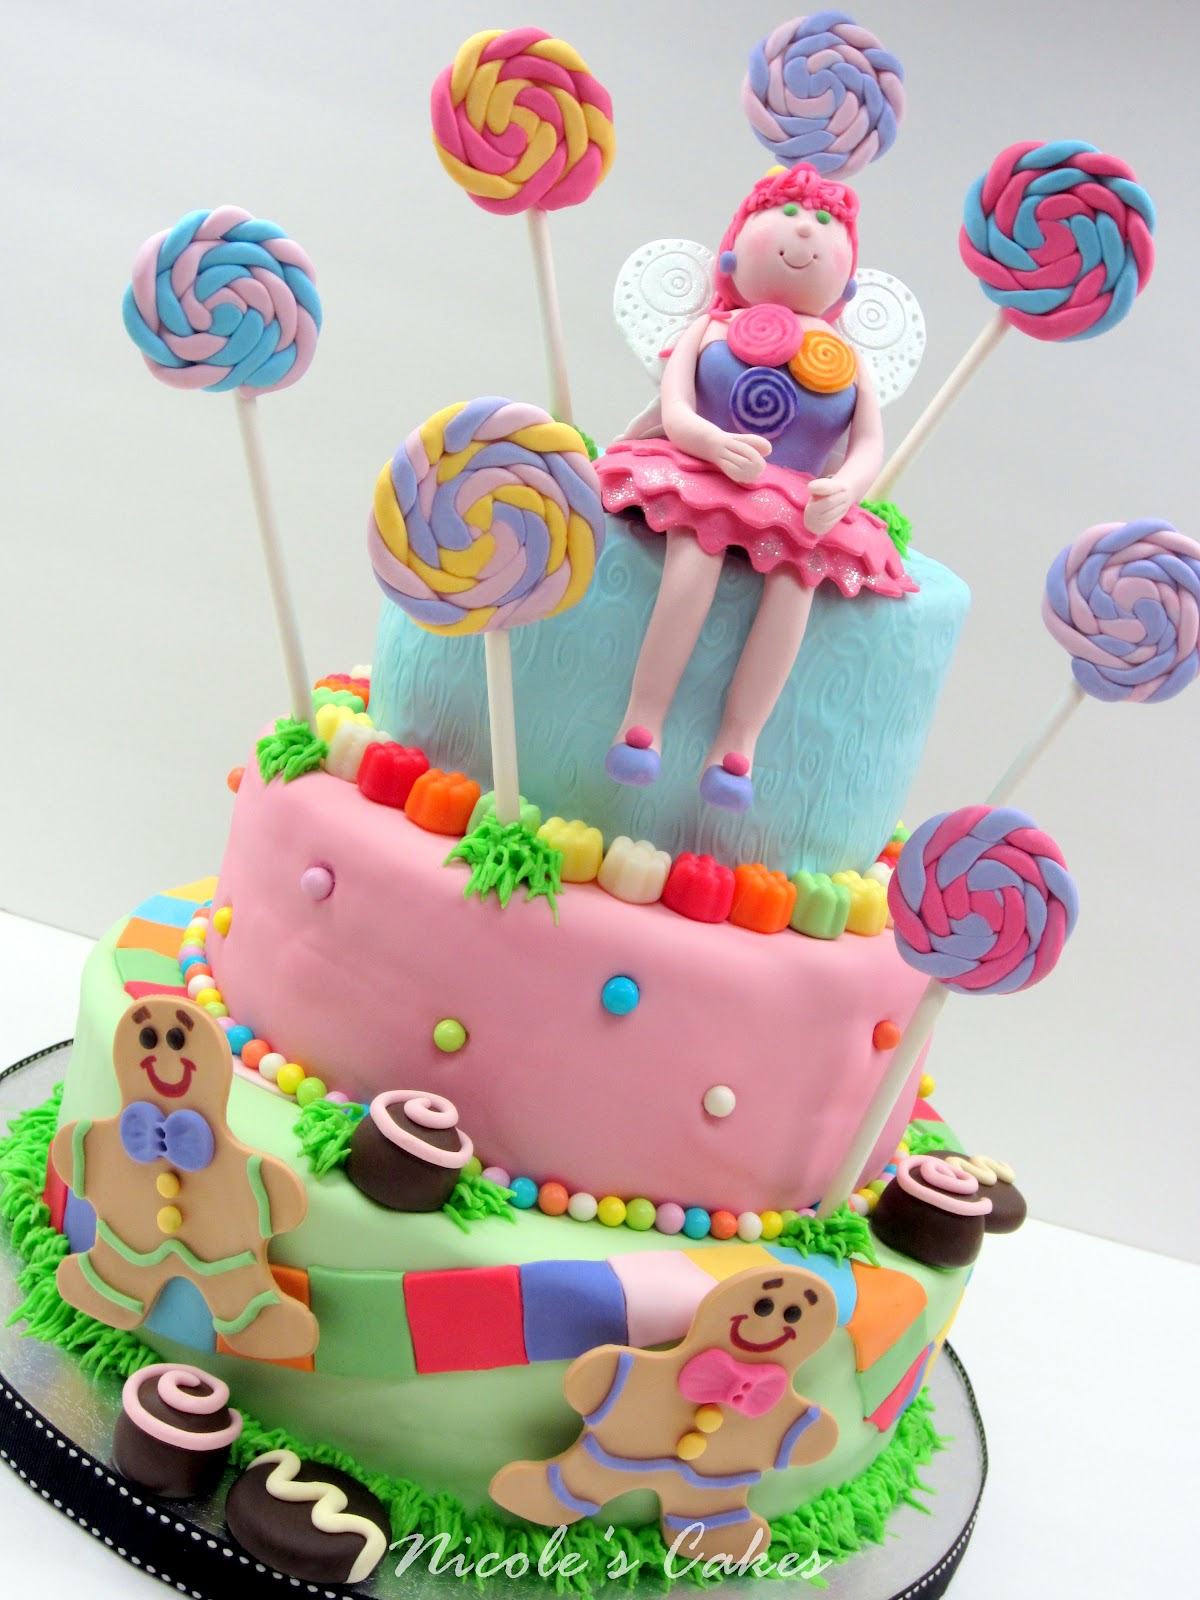 Confections, Cakes & Creations! Colorful 'Candyland' Cake